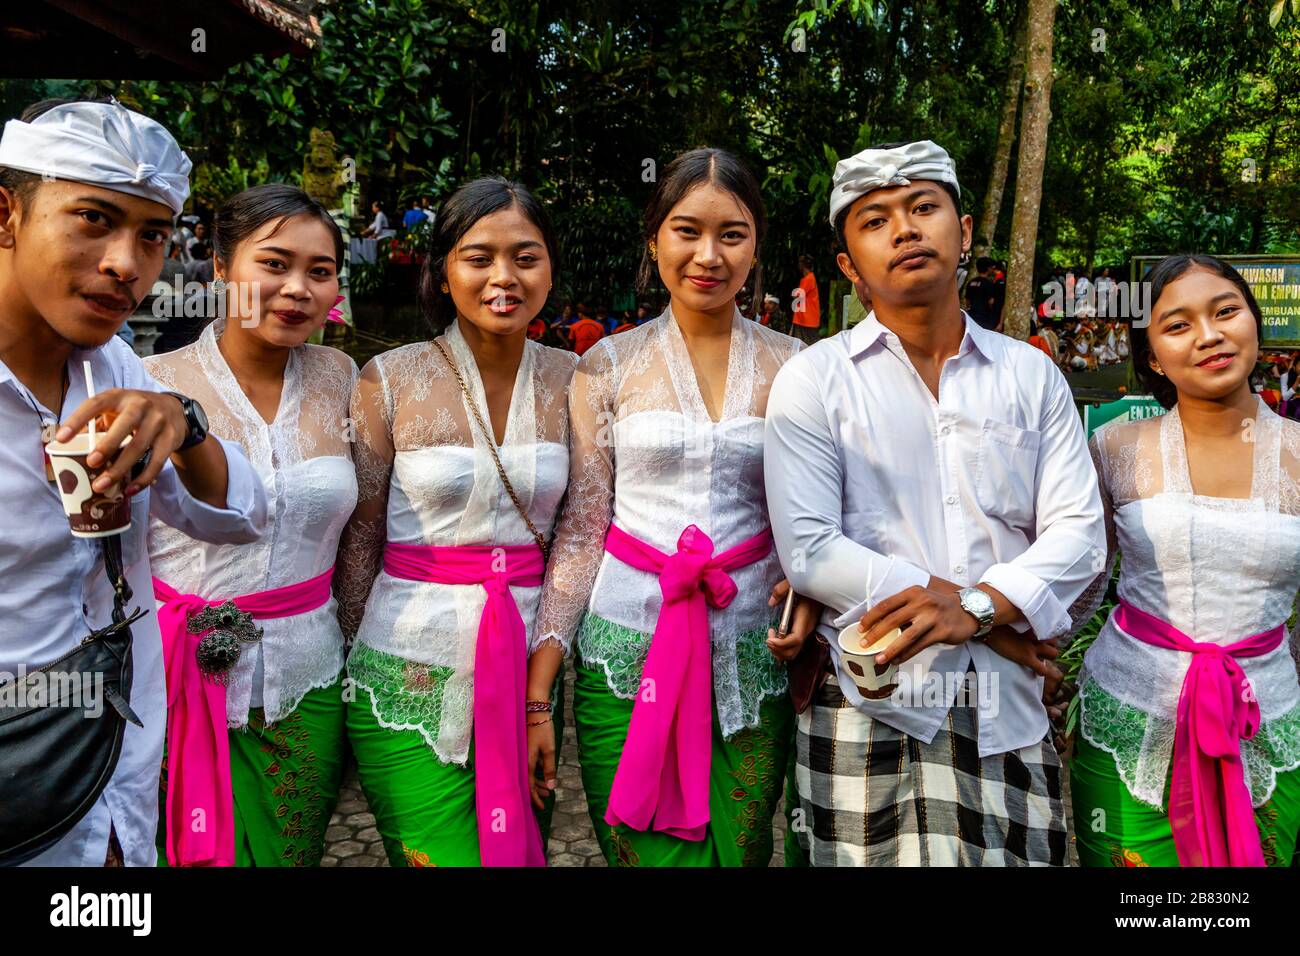 A Group Of Young People In Traditional Costume At A Hindu Festival, Tirta Empul Water Temple, Bali, Indonesia. Stock Photo